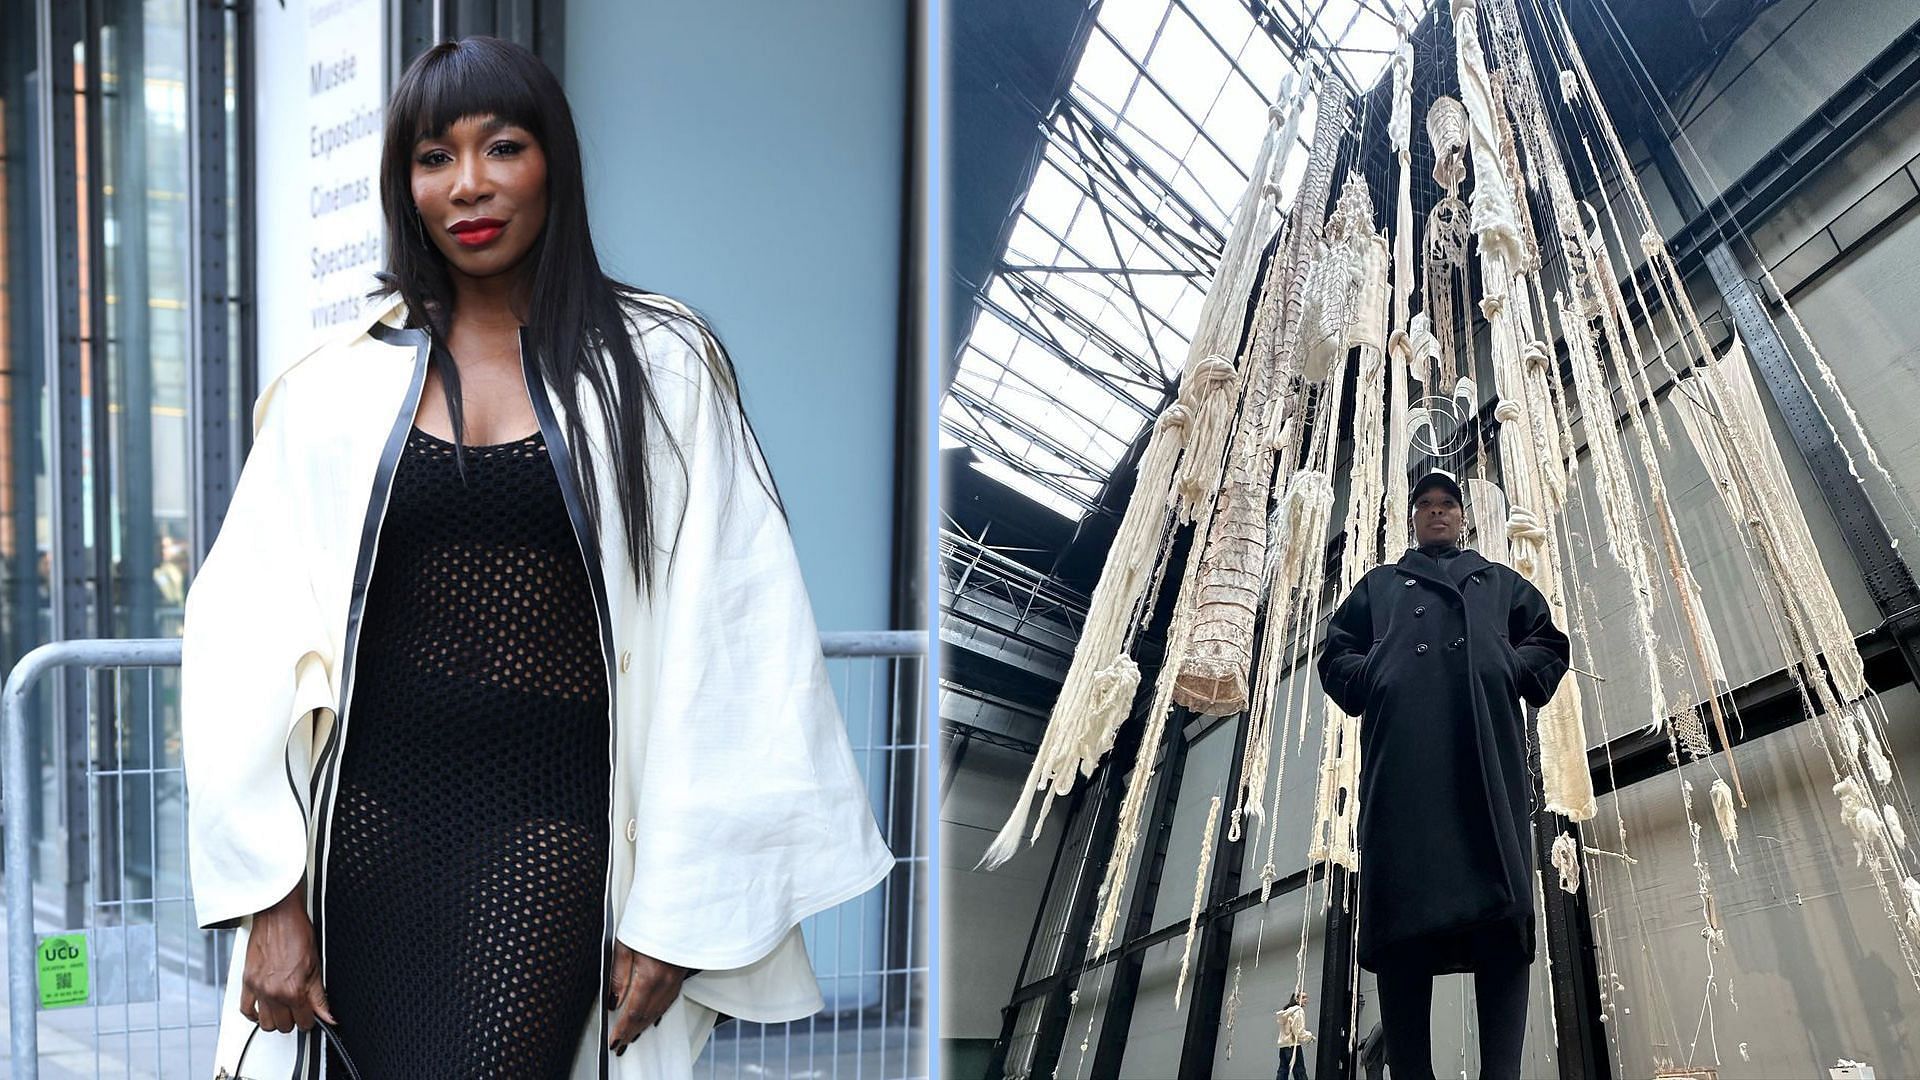 In pictures: Venus Williams immerses herself in the artistic brilliance of Tate Modern Museum in London